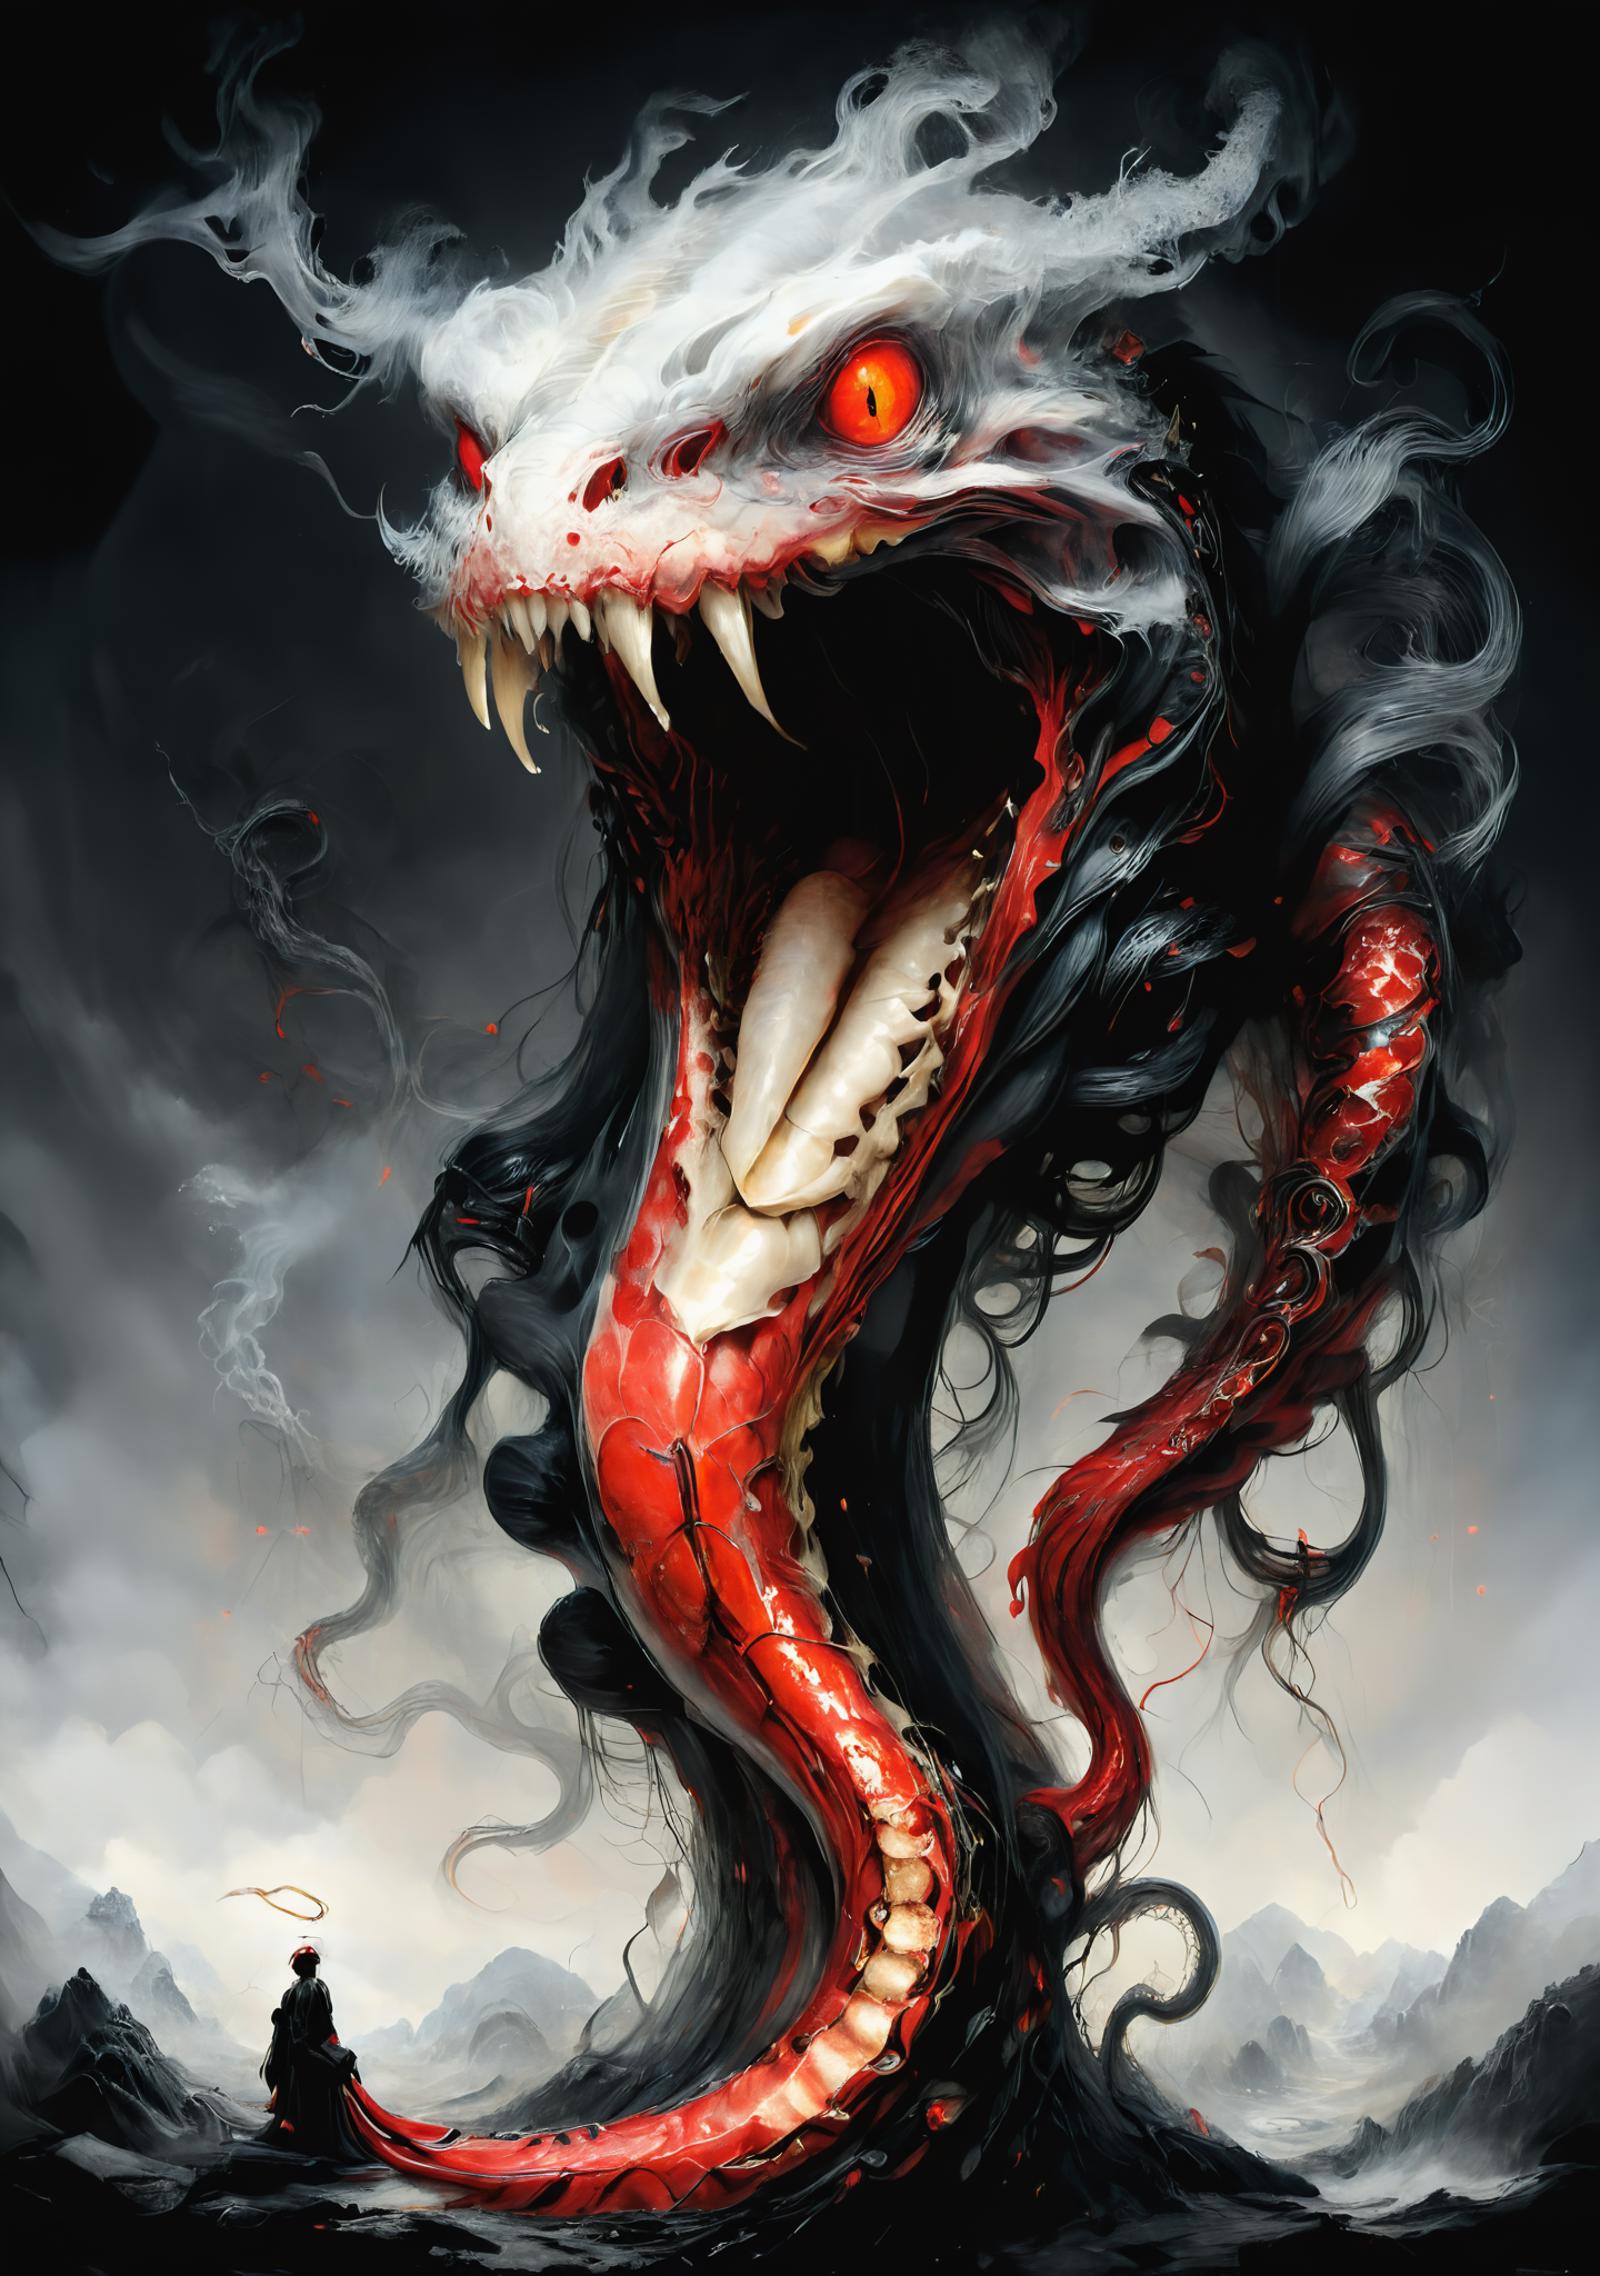 A red and white monster with a red tongue and red eyes, with its mouth open wide.